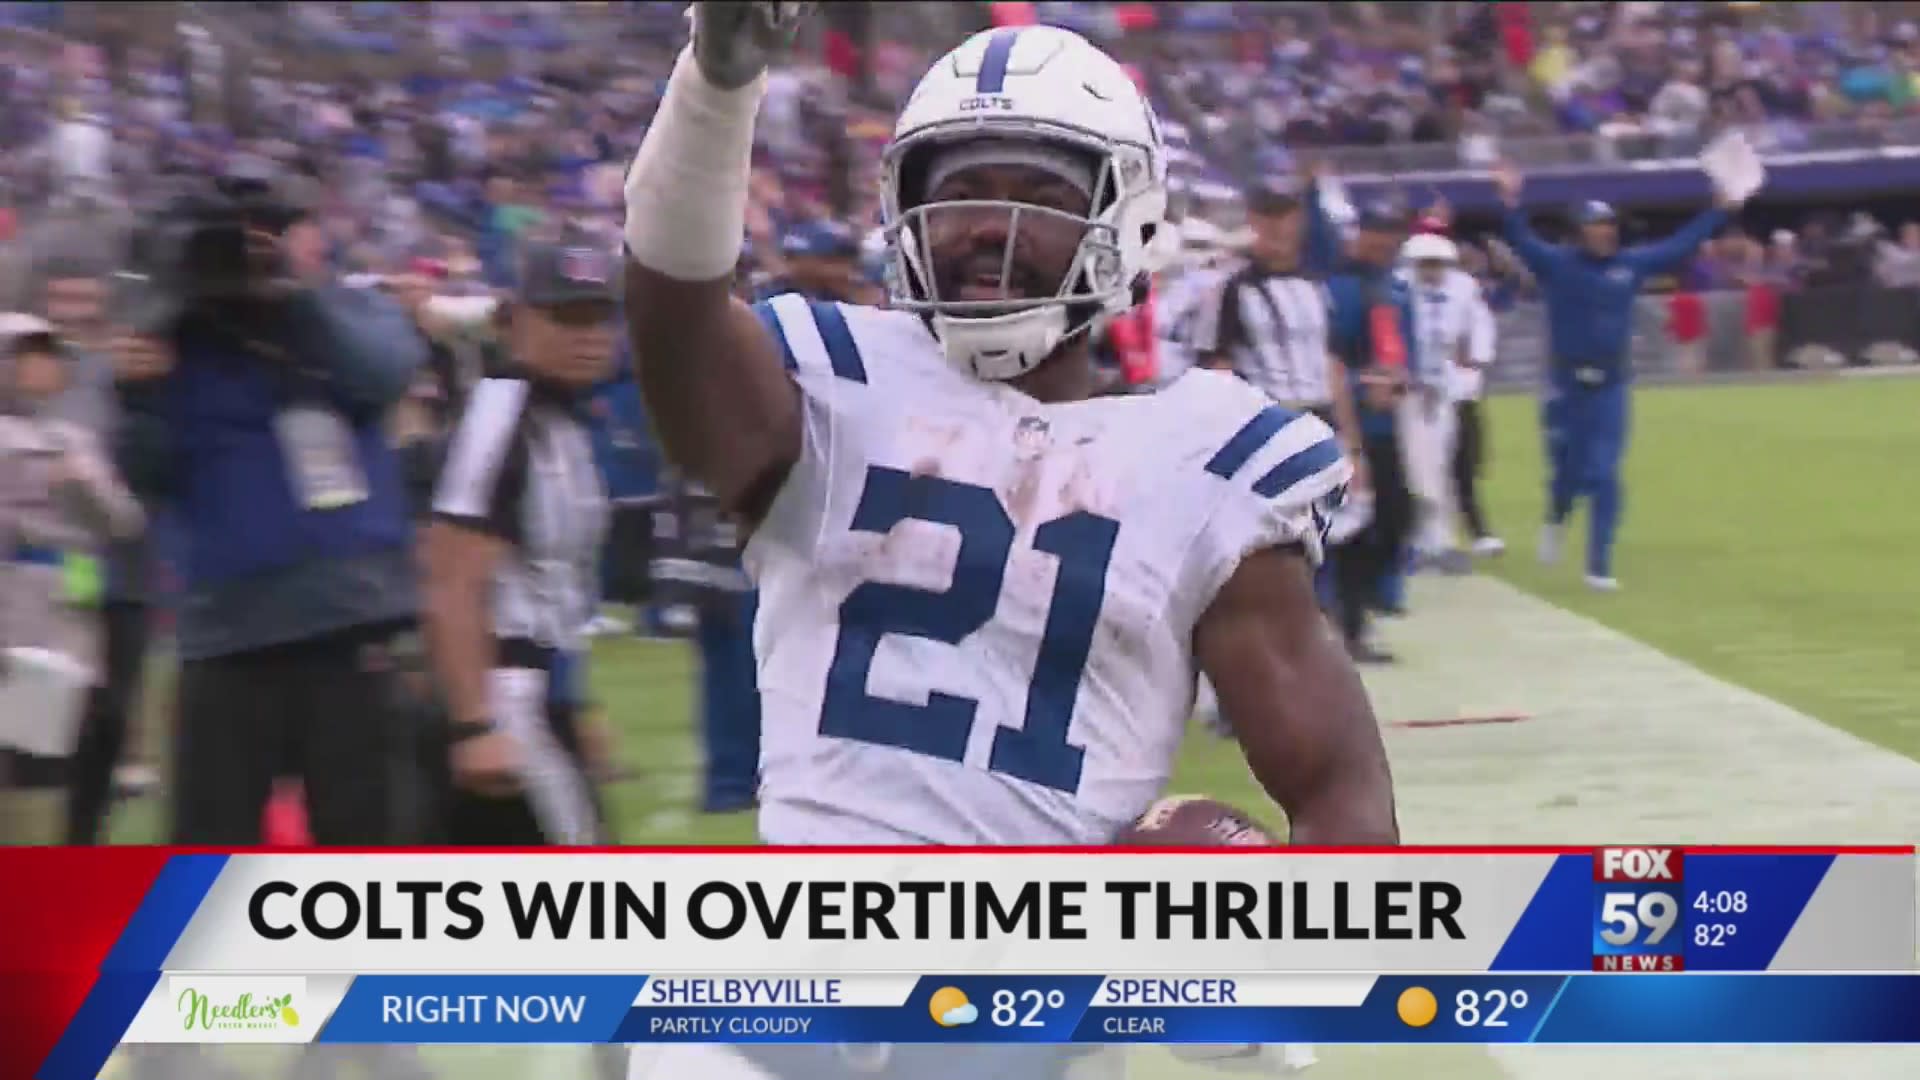 Colts defeat Ravens in overtime thriller